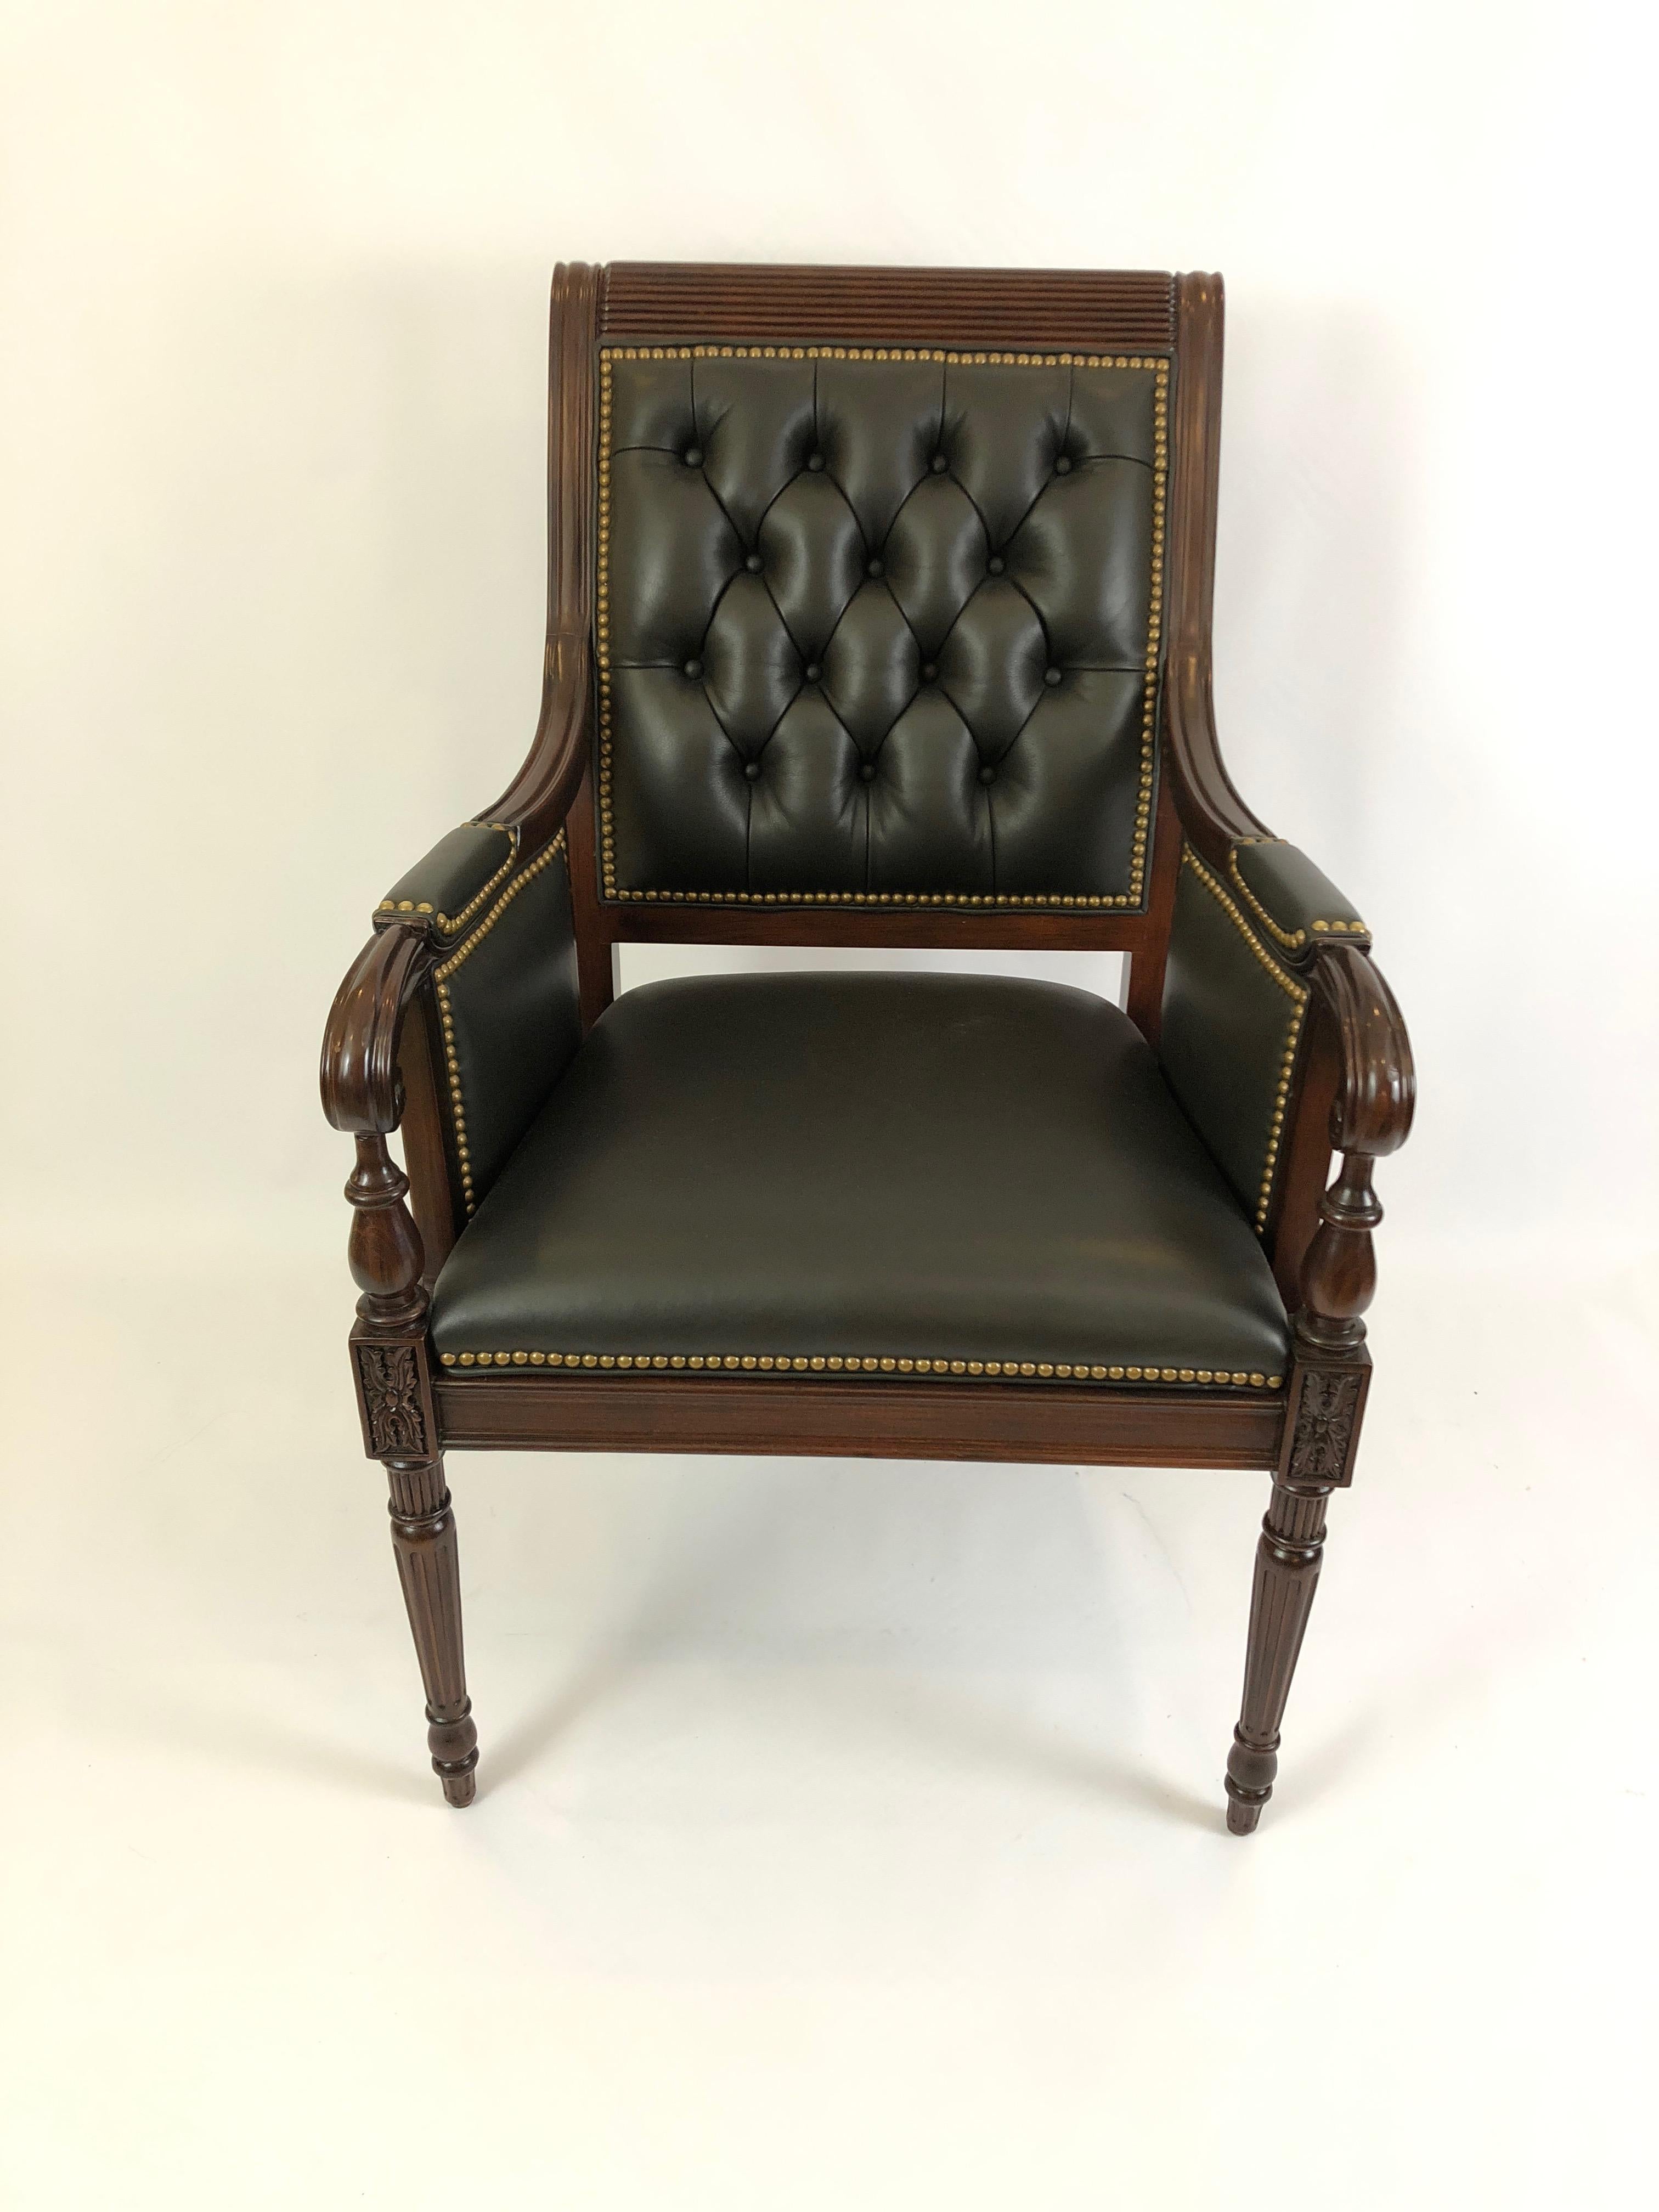 Impressively rich looking substantial arm chair with carved mahogany frame, scrolly arms and tapered legs, upholstered in supple handsome very dark taupe leather. The back is tufted and slants slightly back, and it's all finished with brass